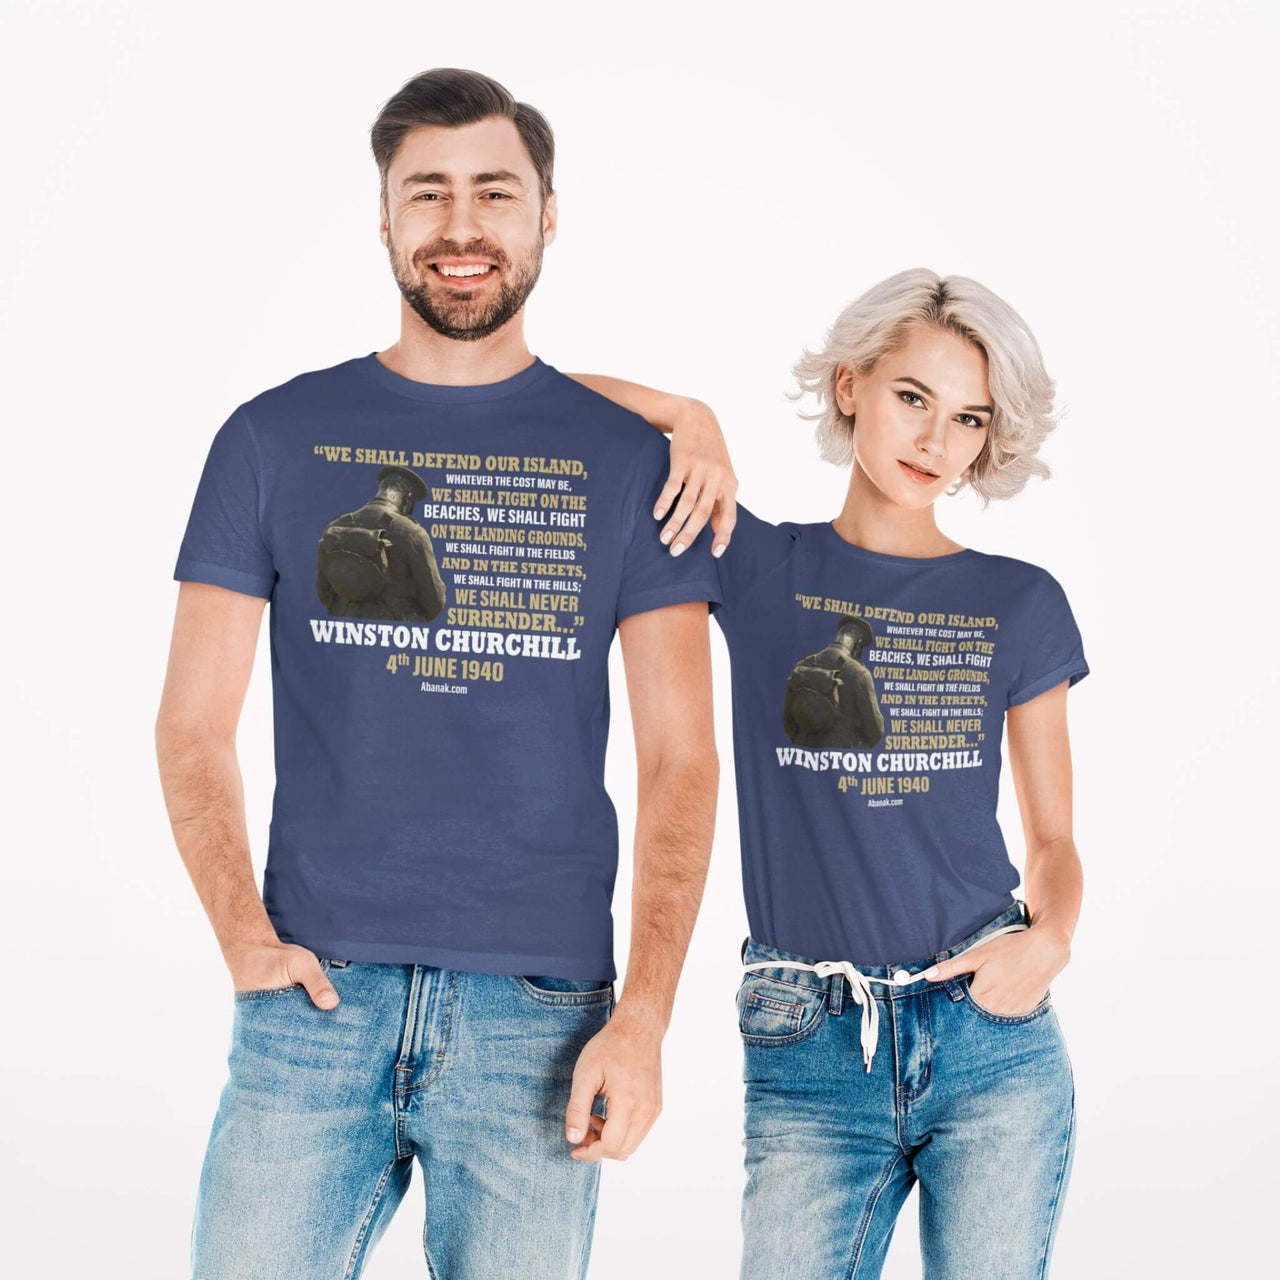 We Shall Never Surrender - Winston Churchill Inspirational Quote - Unisex Vintage Tee